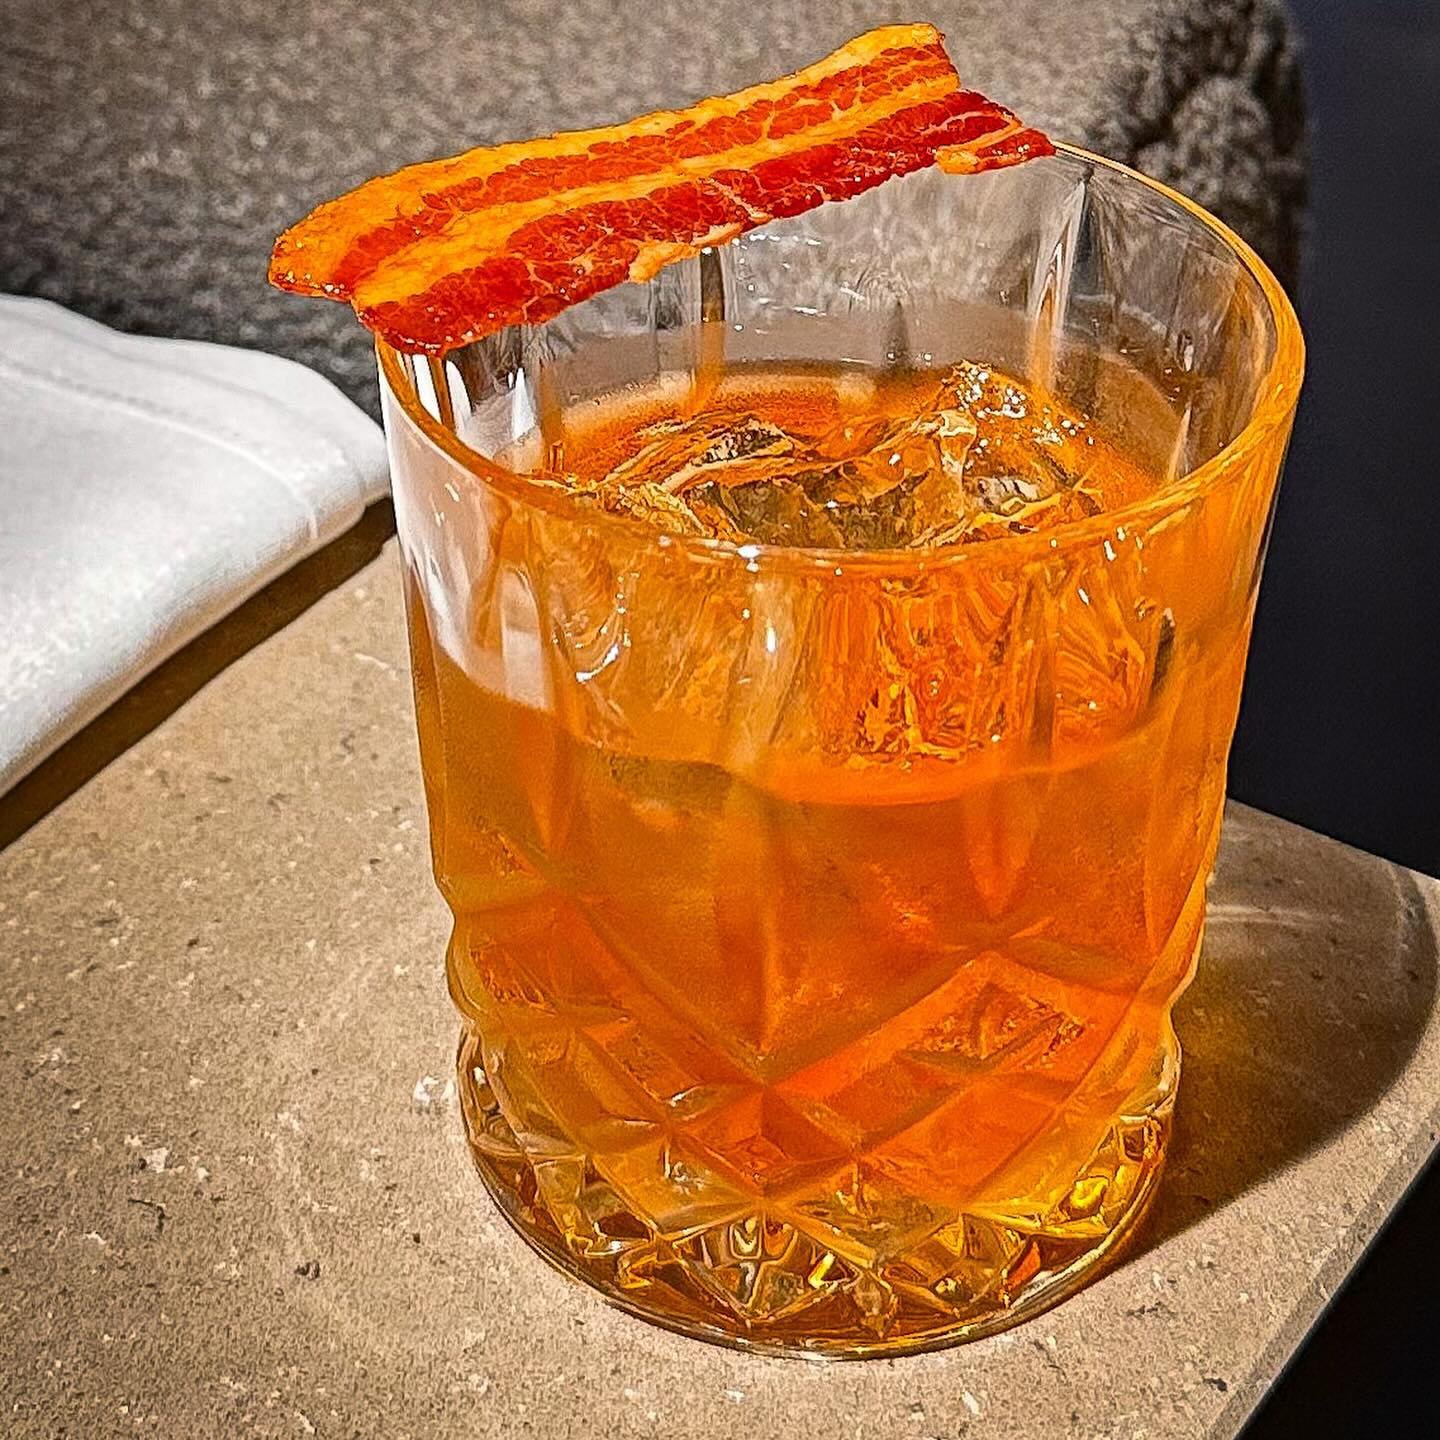 &ldquo;What&rsquo;s better than an old fashioned?&hellip;

The English Breakfast old fashioned!
 
Bacon fat washed Silkie whiskey | earl grey syrup | candied bacon

#oldfashionedcocktail #breakfastoldfashioned #whiskey  #whiskeylover #candiedbacon #o